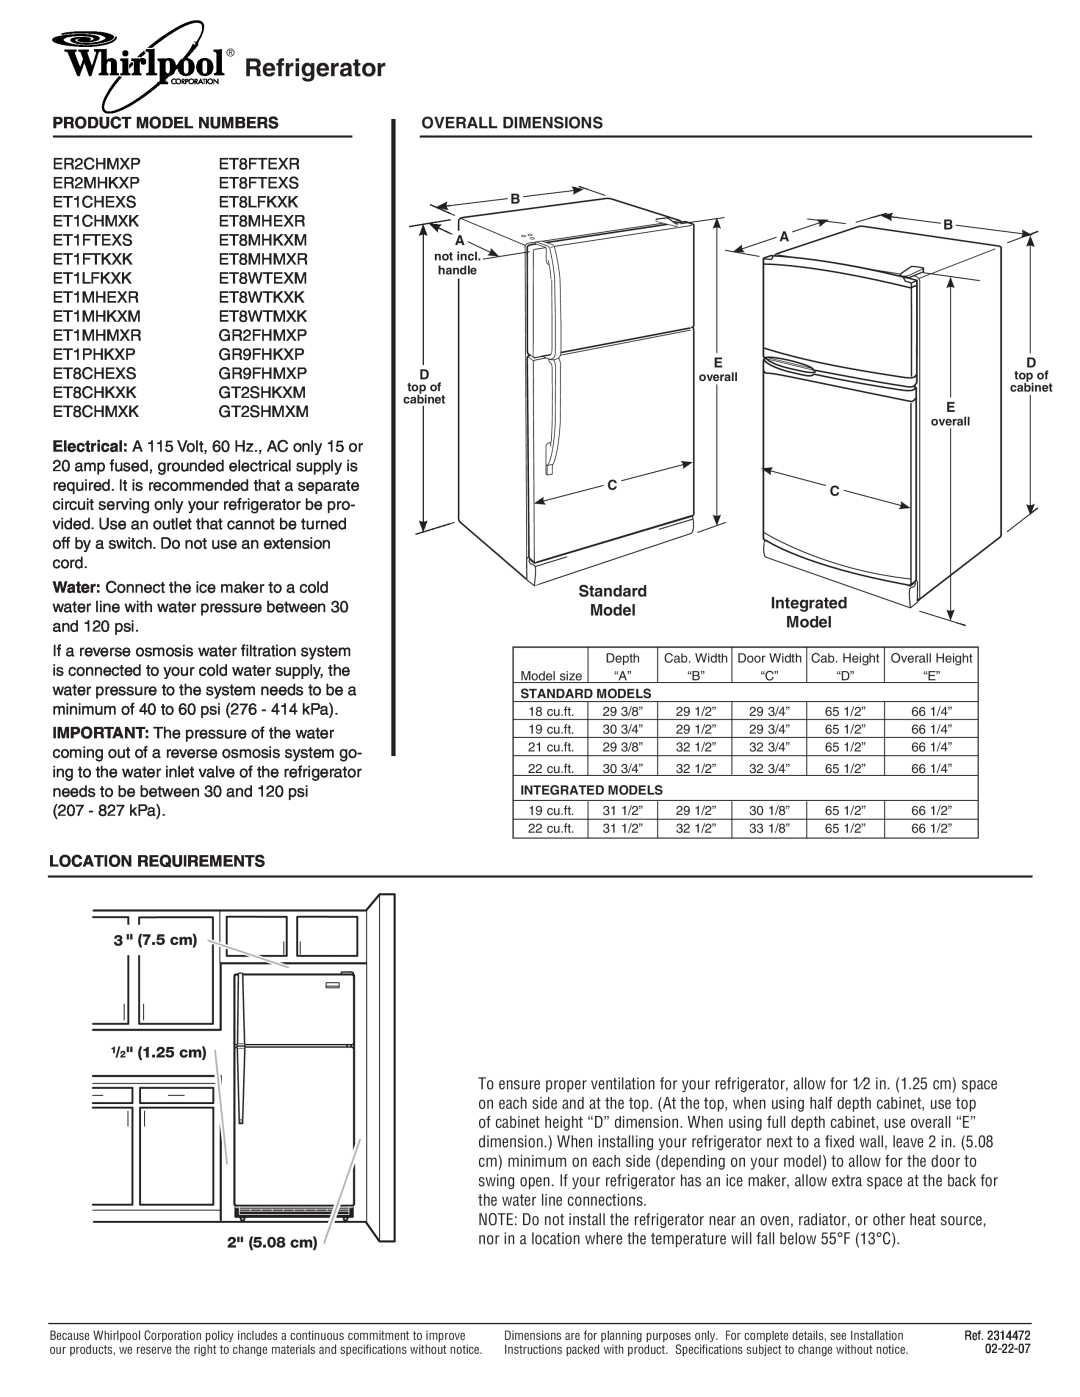 Whirlpool ET1FTKXK, ET1MHEXR dimensions Refrigerator, Product Model Numbers, Overall Dimensions, Standard, Integrated 